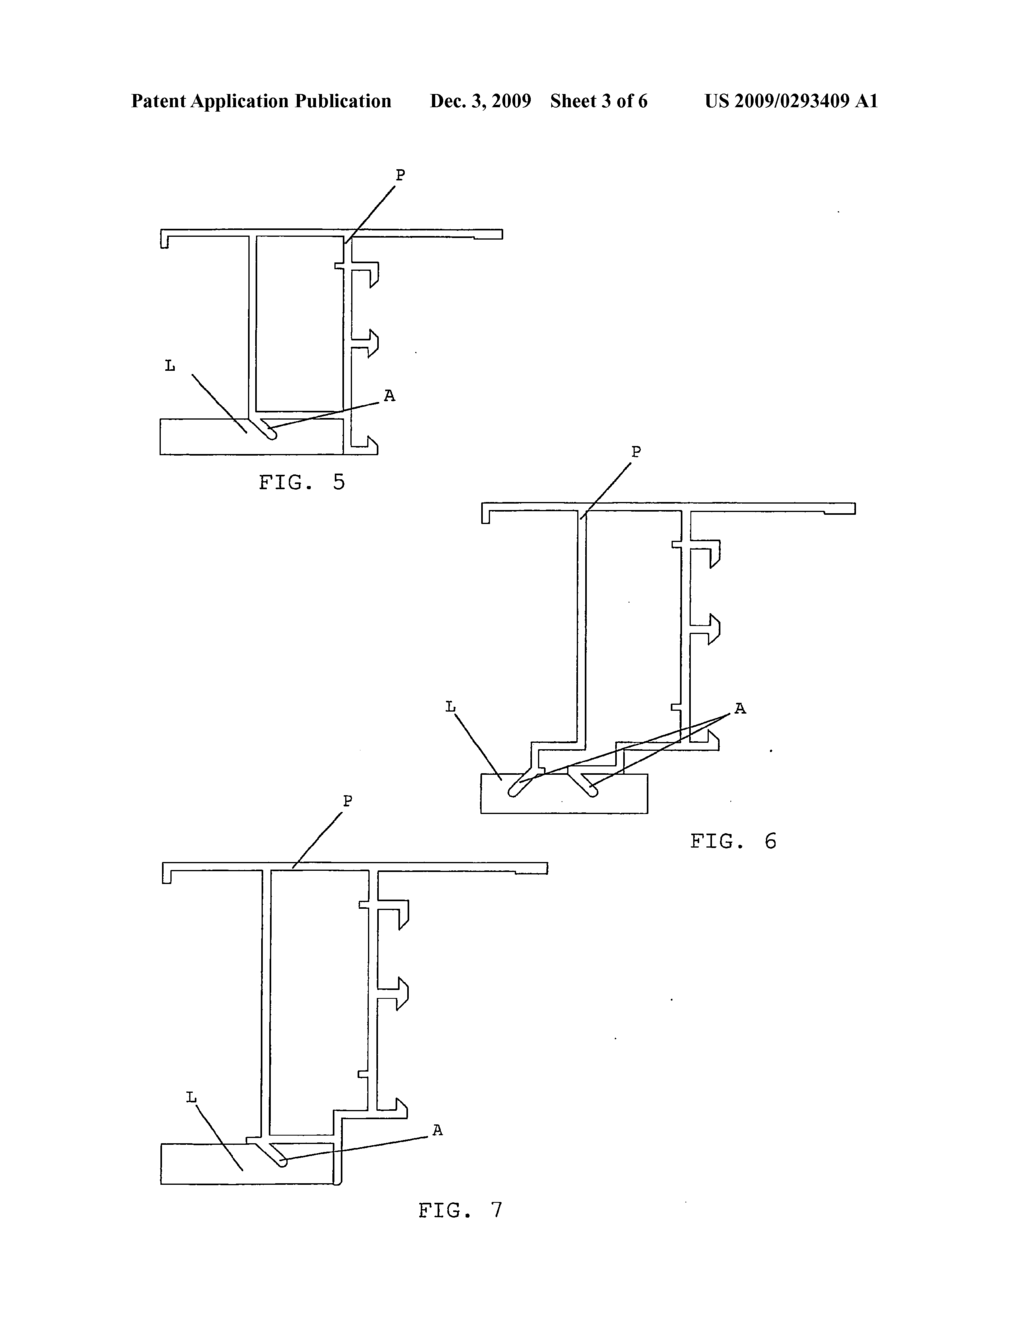 Section Bar for Fixtures Constituted by a Section Bar Made of Metallic or Plastic Material, Having Cross-Sectional Section Preferably Opened, Which is Firmly Coupled to a Laminated Plastic Profile Having Structural and Decorative Function - diagram, schematic, and image 04